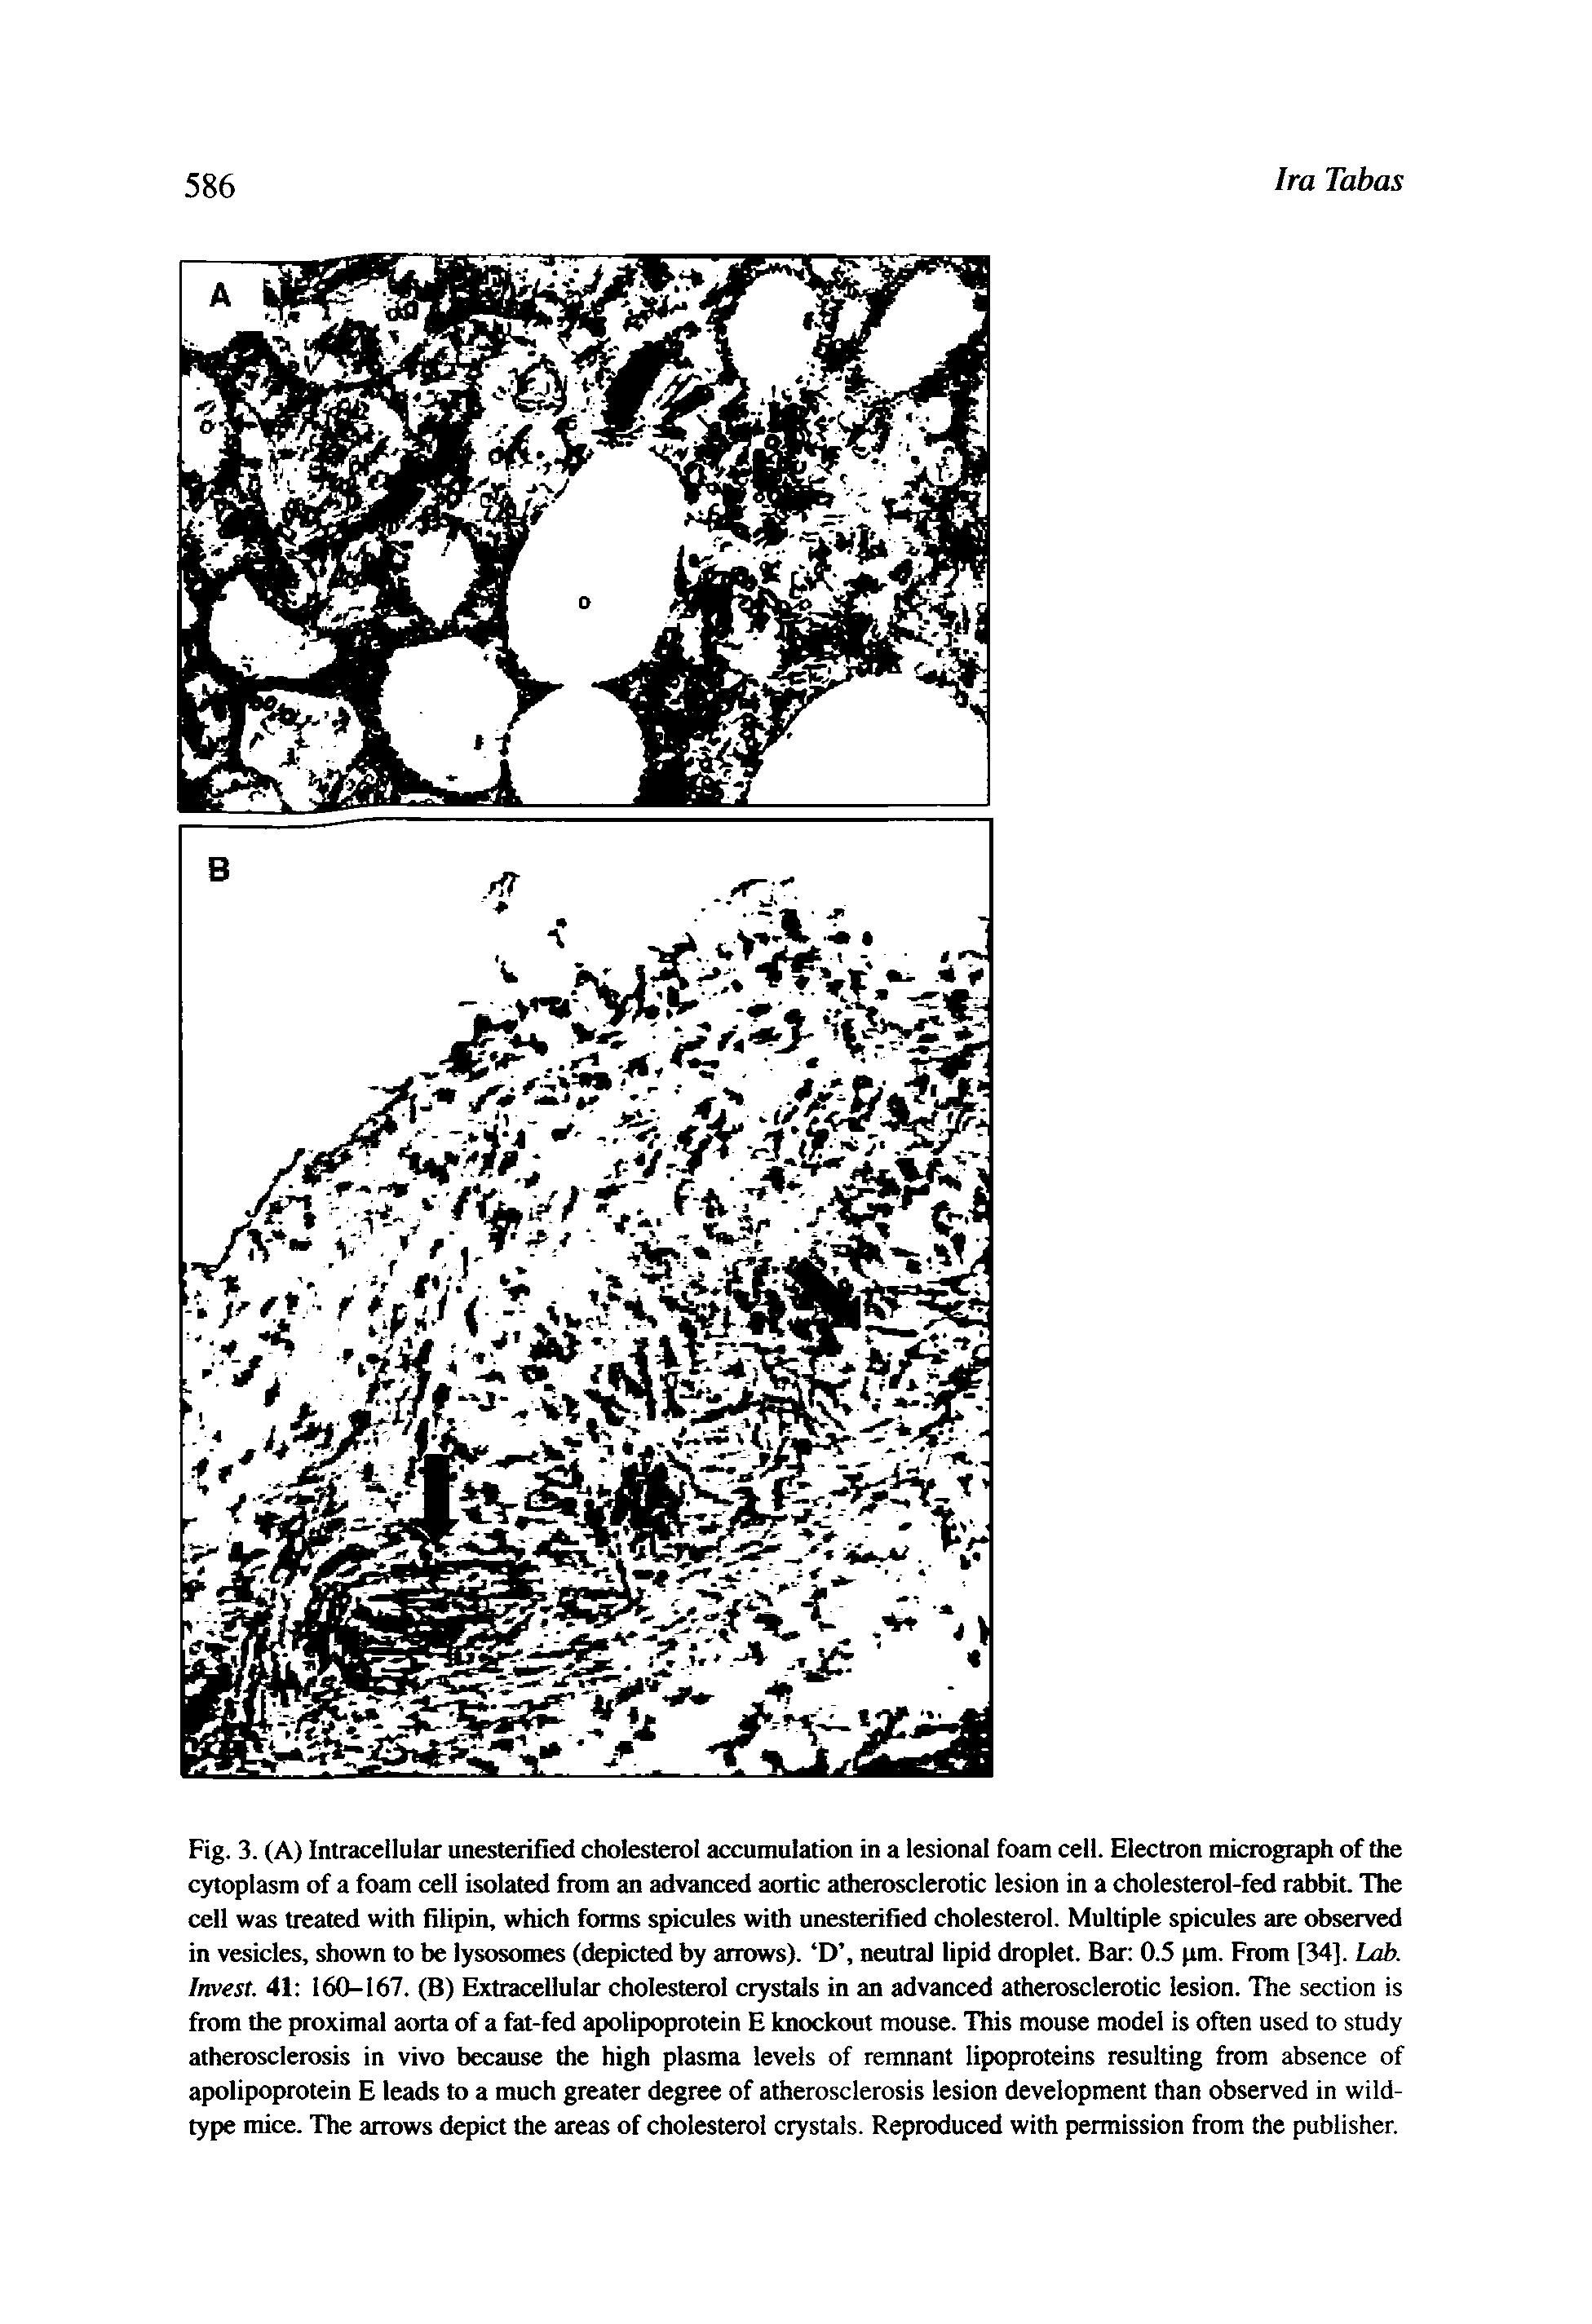 Fig. 3. (A) Intracellular unesterified cholesterol accumulation in a lesional foam cell. Electron micrograph of the cytoplasm of a foam cell isolated ftom an advanced aortic atherosclerotic lesion in a cholesterol-fed rabbit. The cell was treated with filipin, which forms spicules with unesterified cholesterol. Multiple spicules are observed in vesicles, shown to be lysosomes (depicted by arrows). D , neutral lipid droplet. Bar 0.5 pm. From [34]. Lab. Invest. 41 160-167. (B) Extracellular cholesterol crystals in an advanced atherosclerotic lesion. The section is from the proximal aorta of a fat-fed apolipoprotein E knockout mouse. This mouse model is often used to study atherosclerosis in vivo because the high plasma levels of remnant lipoproteins resulting from absence of apolipoprotein E leads to a much greater degree of atherosclerosis lesion development than observed in wild-type mice. The arrows depict the areas of cholesterol crystals. Reproduced with permission from the publisher.